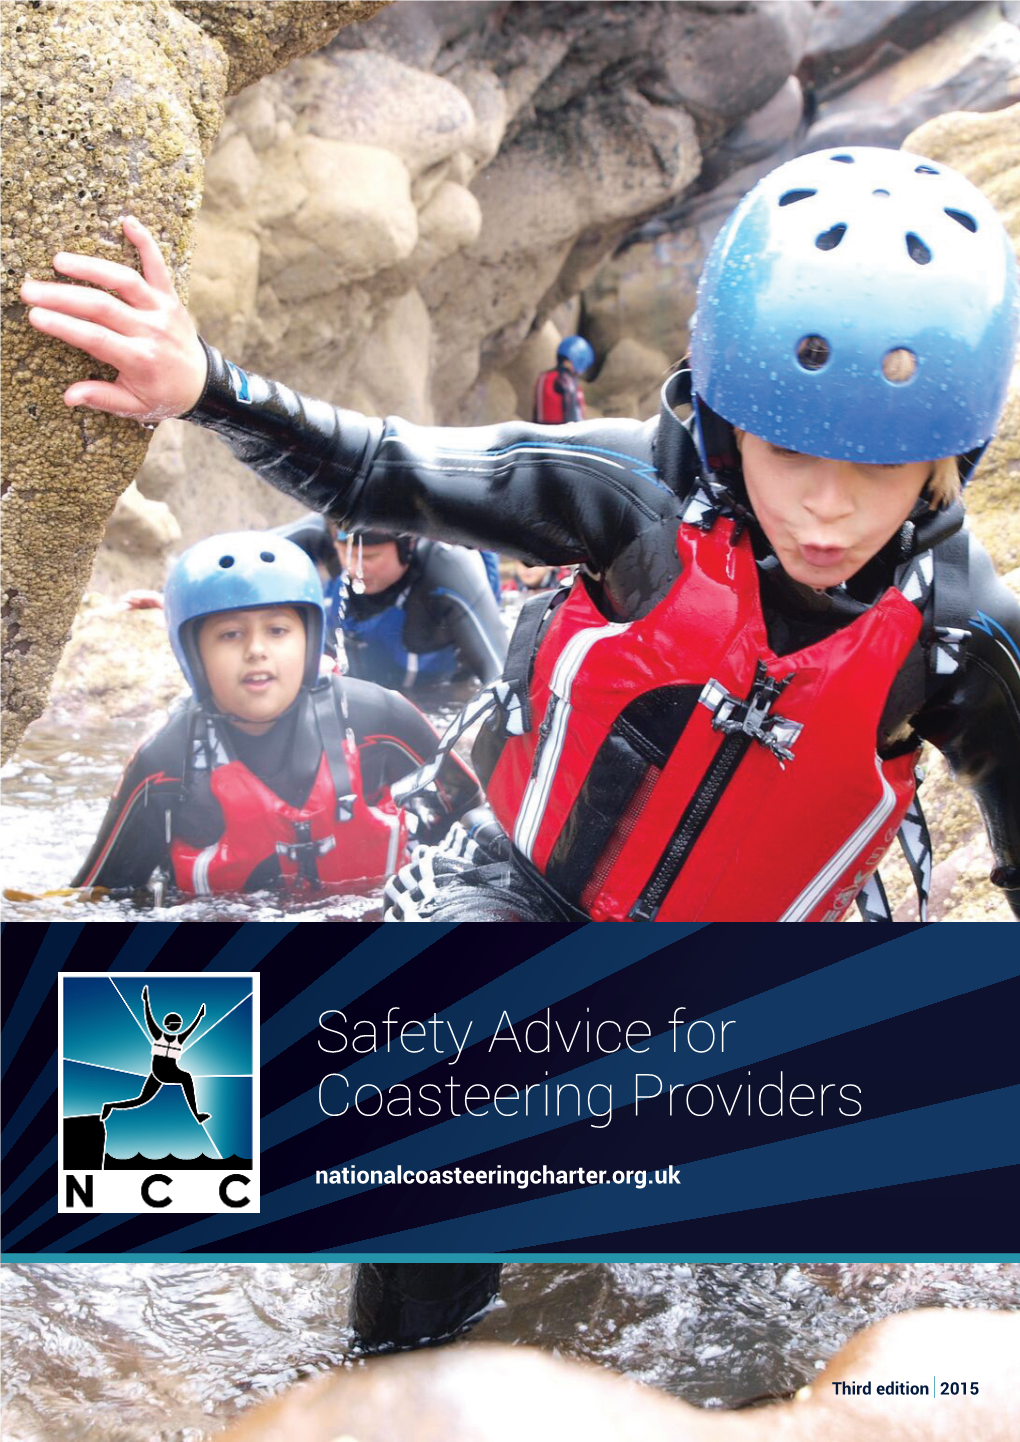 Safety Advice for Coasteering Providers